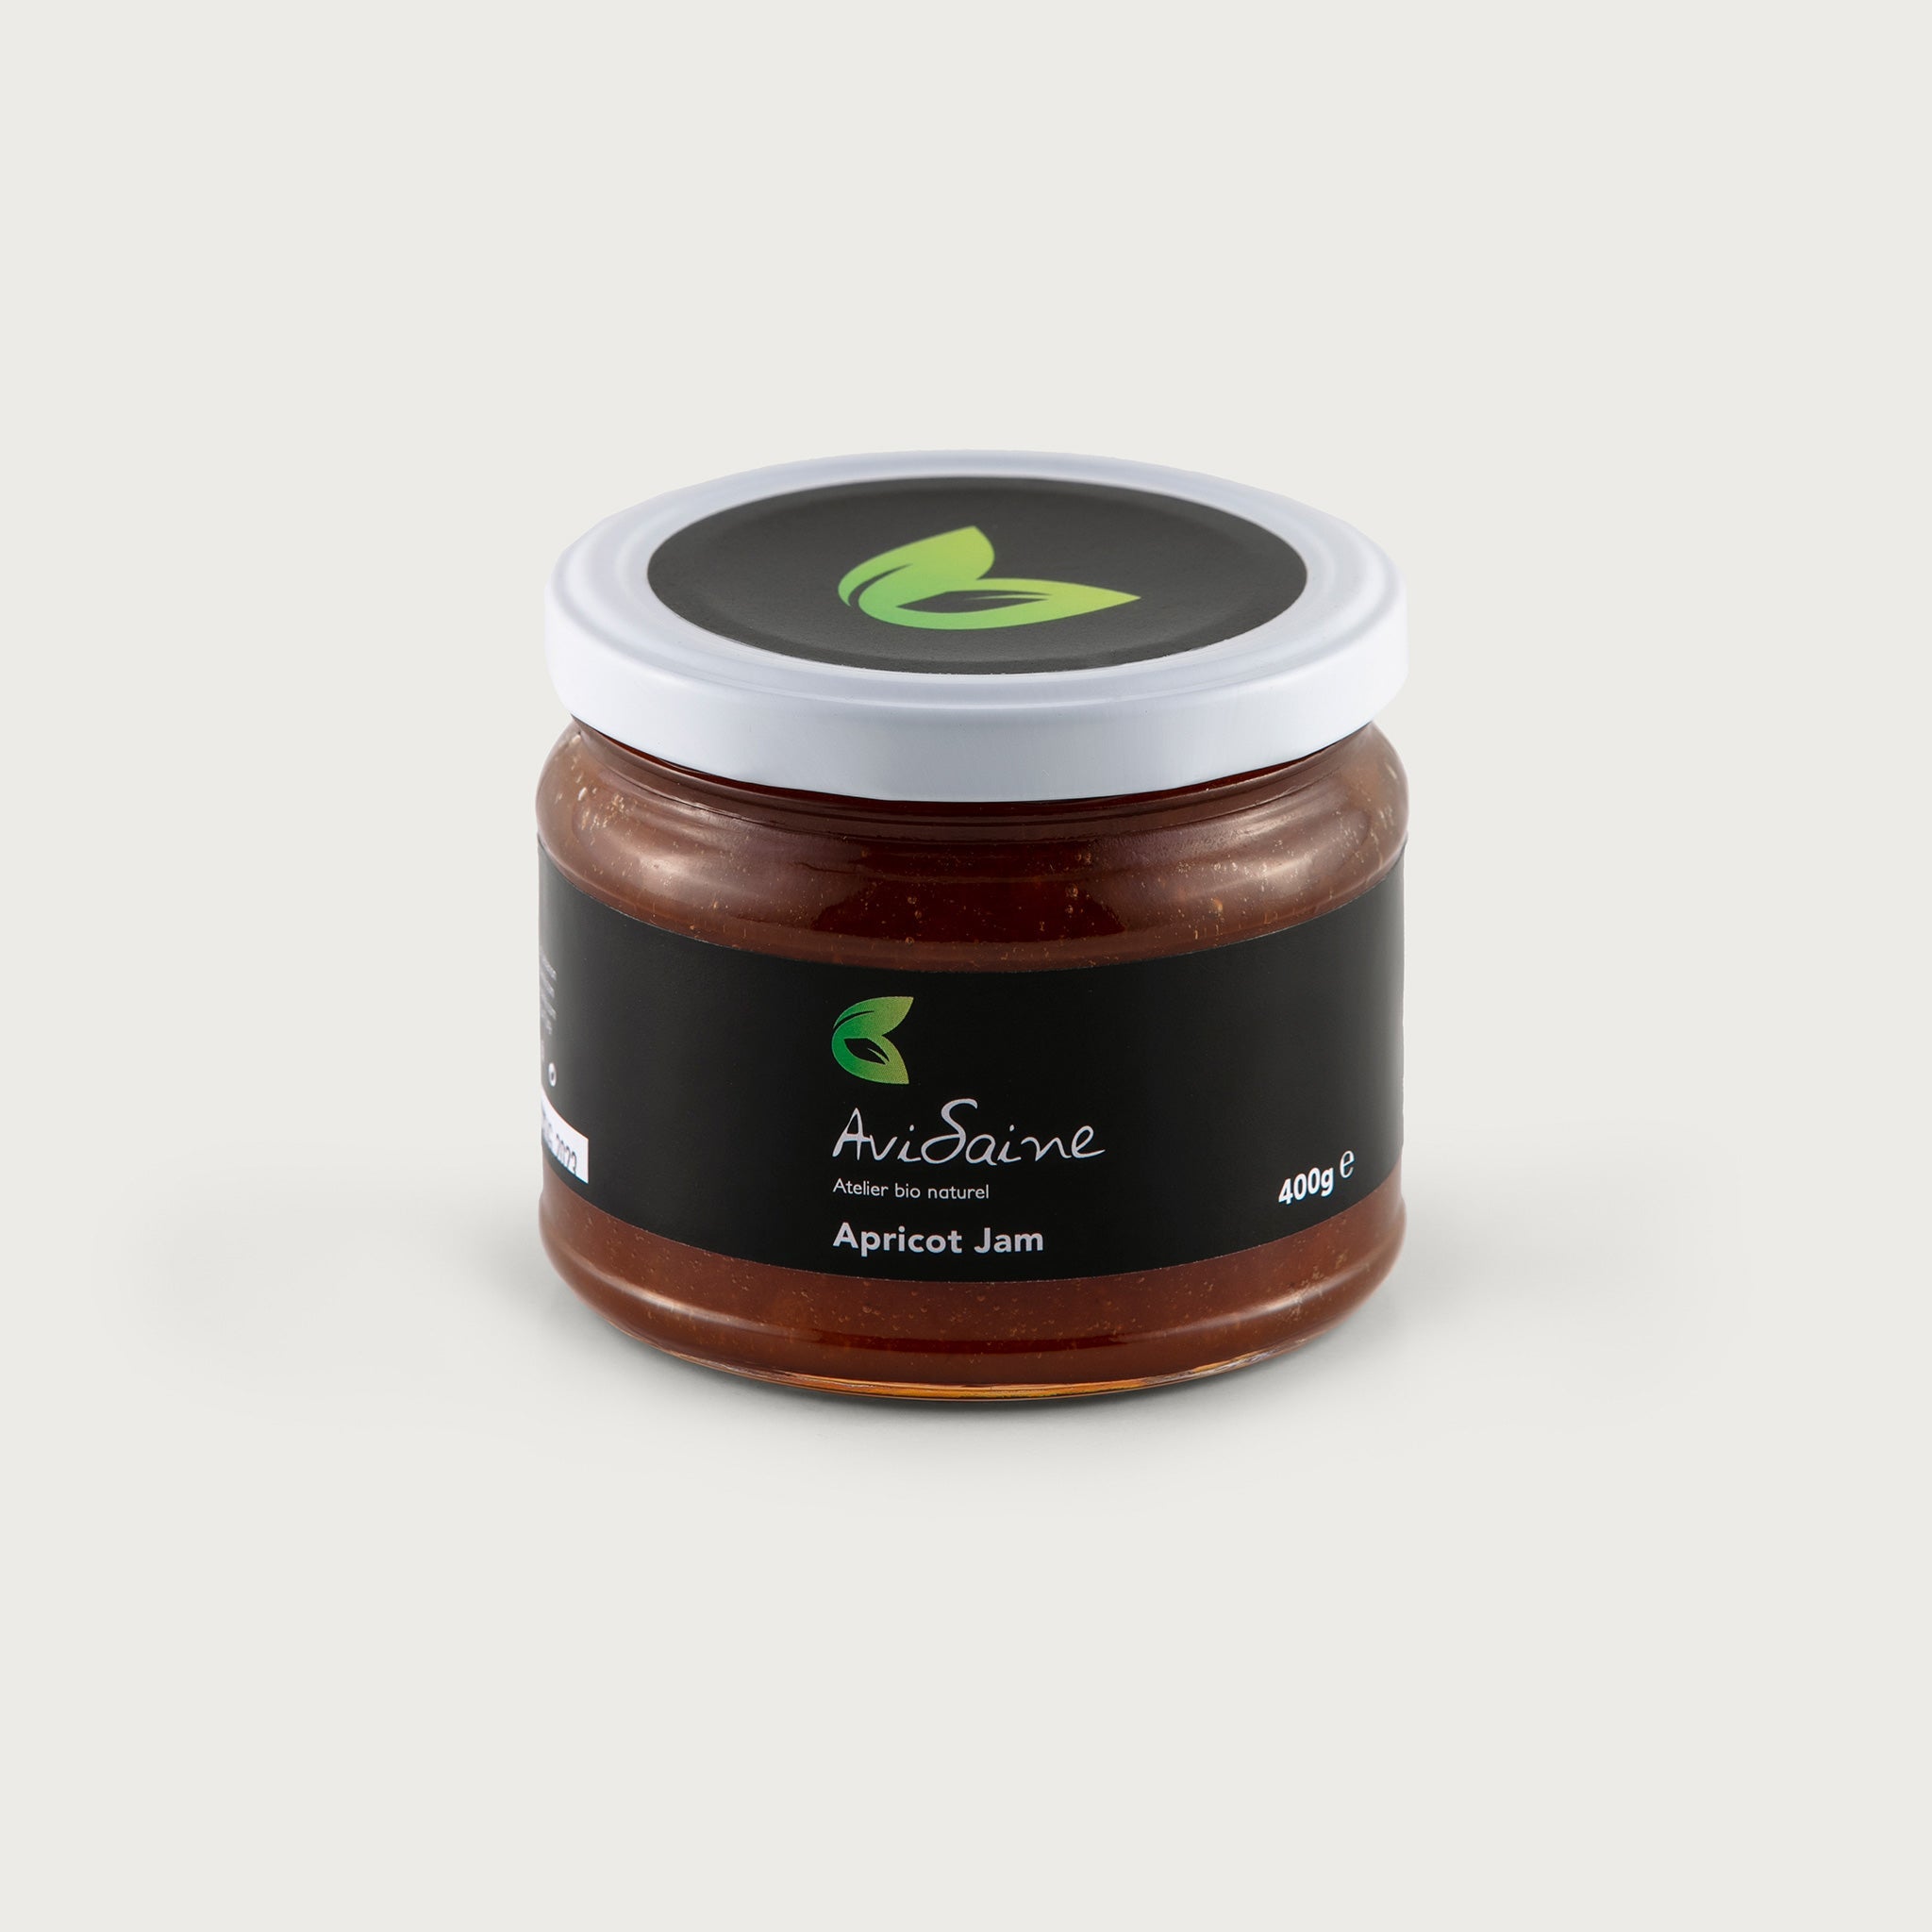 A clear 14 oz. jar shows the rich honey colored Apricot jam with particulates. The label is black and features the AviSaine logo in green.